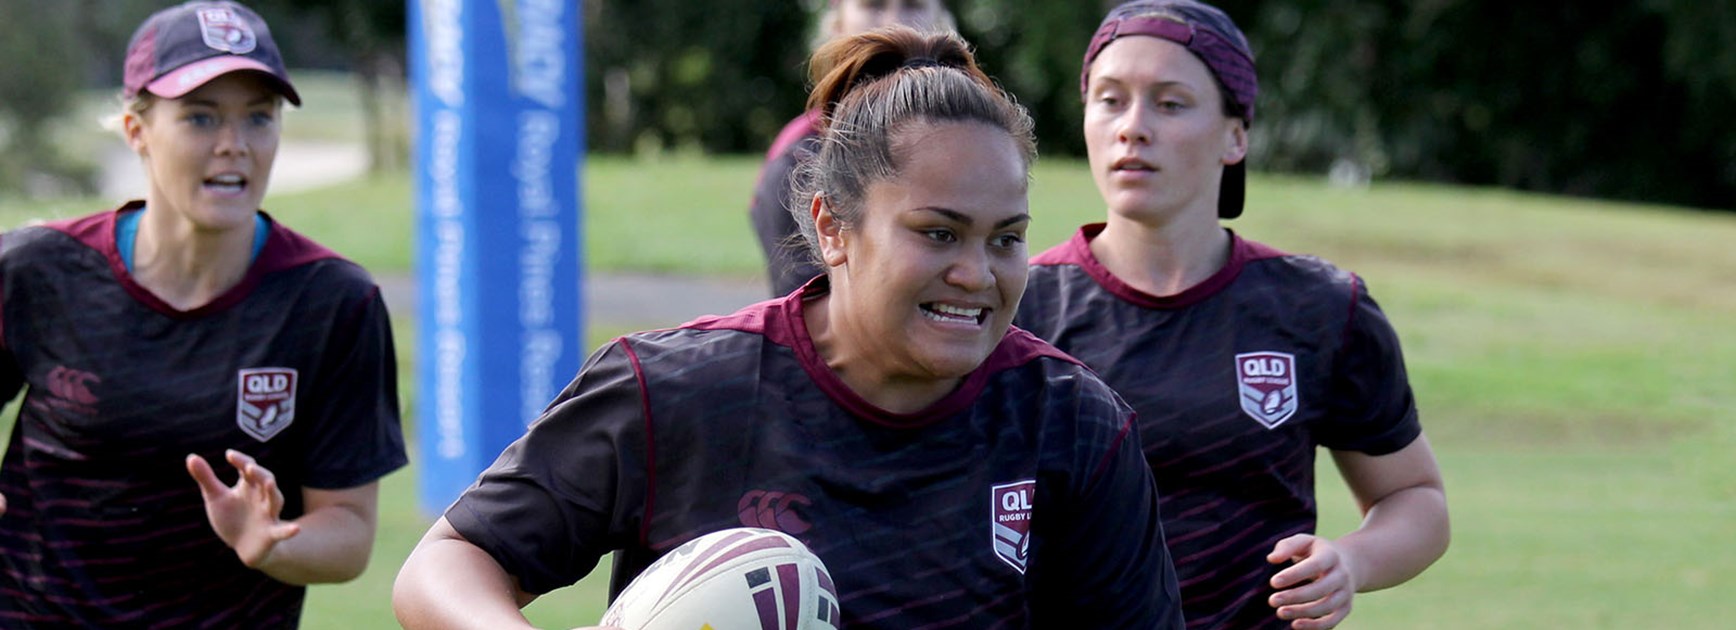 Jazymn Taumafai is excited to play her second game for Queensland on Saturday.